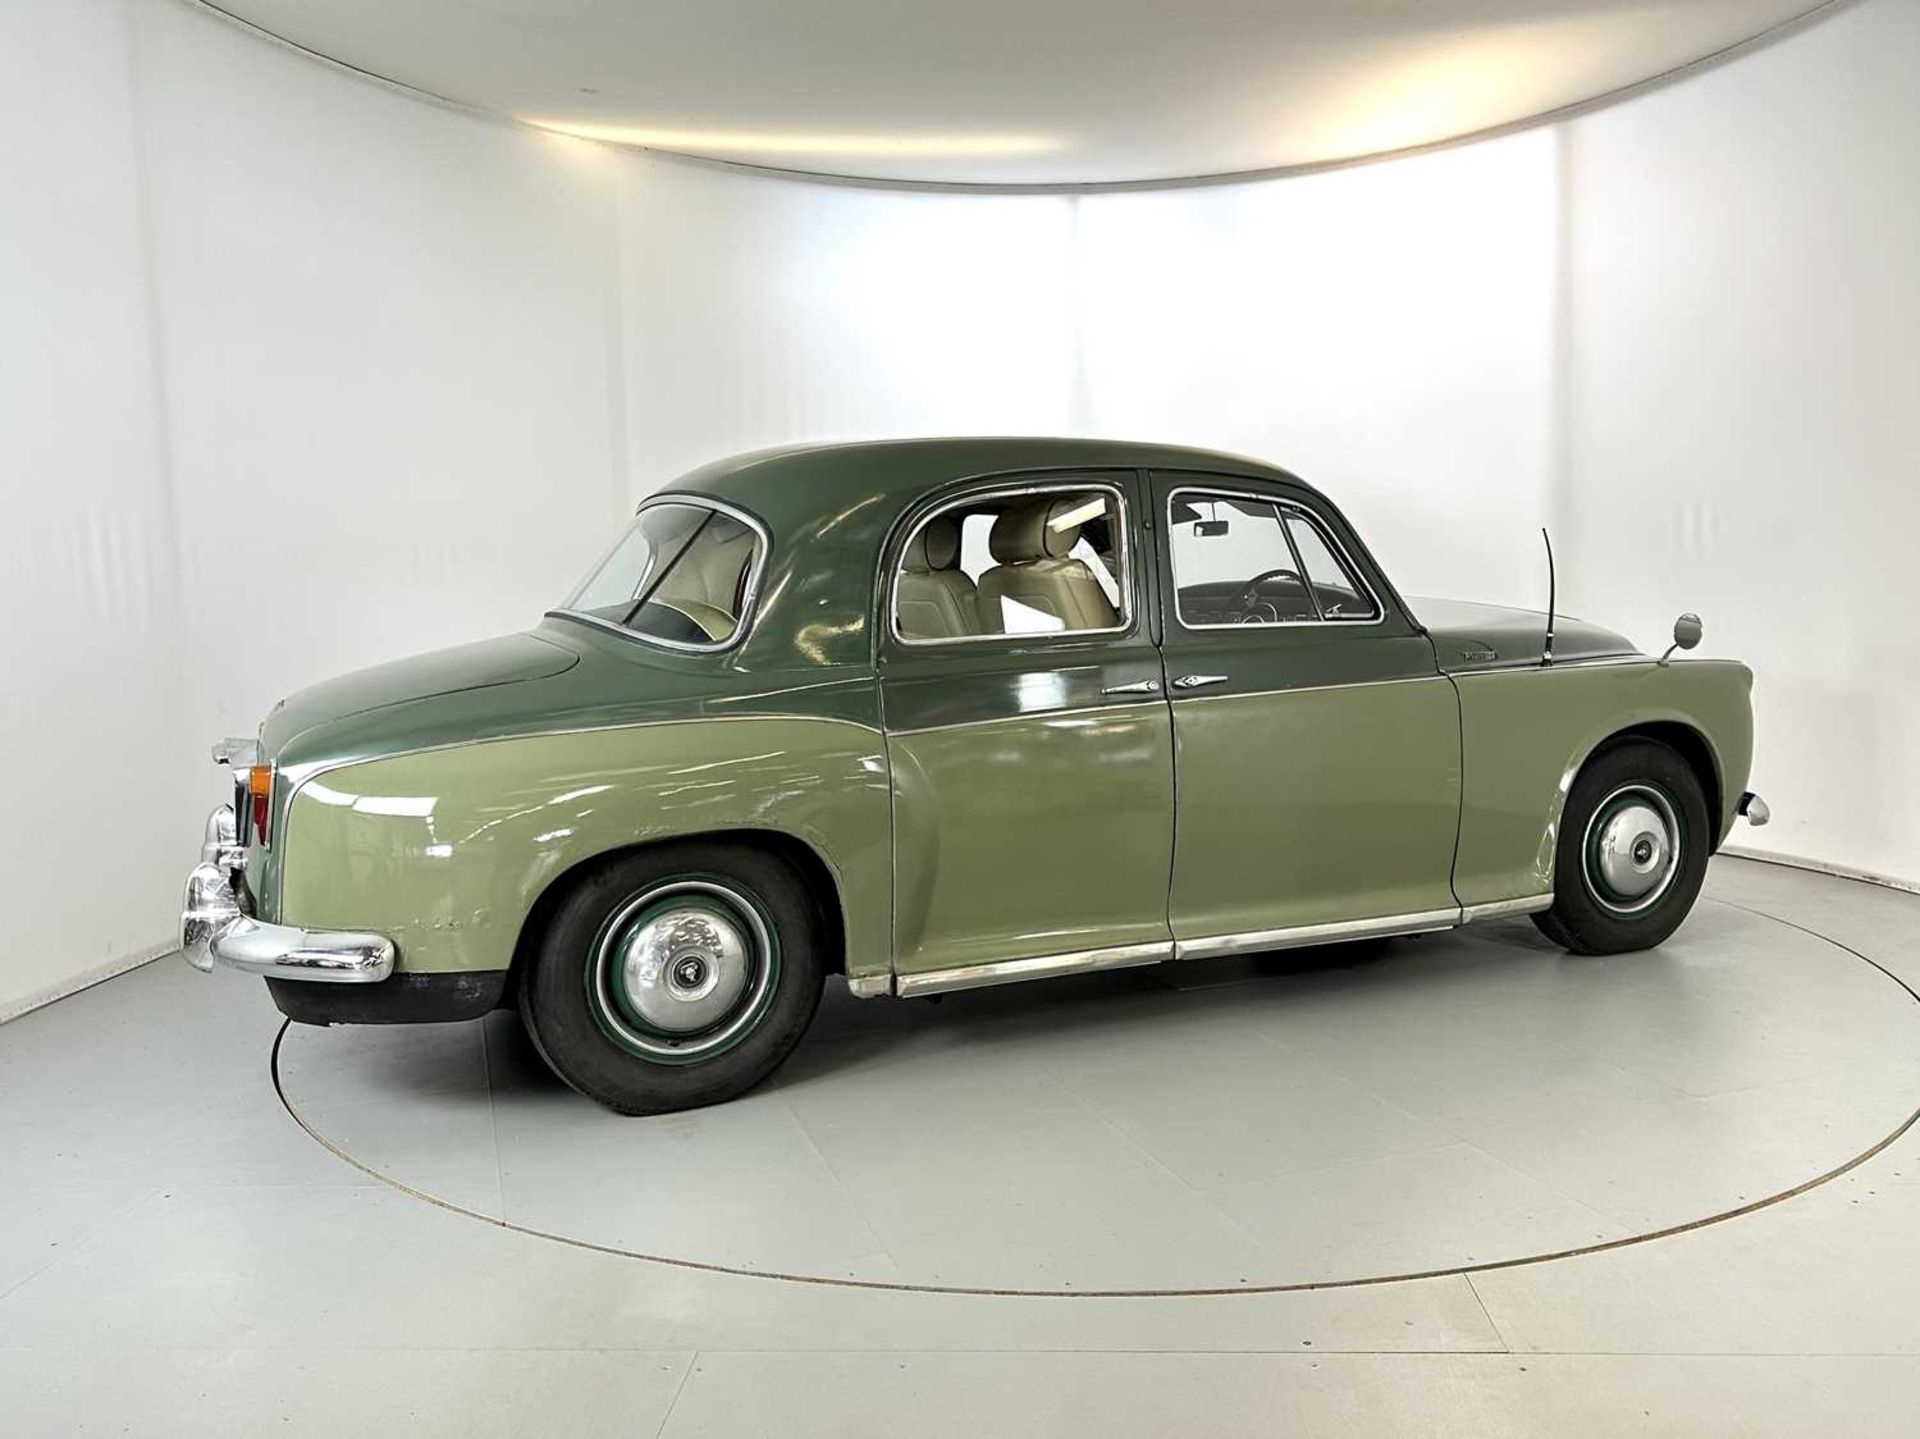 1959 Rover P4 100 - Image 10 of 31